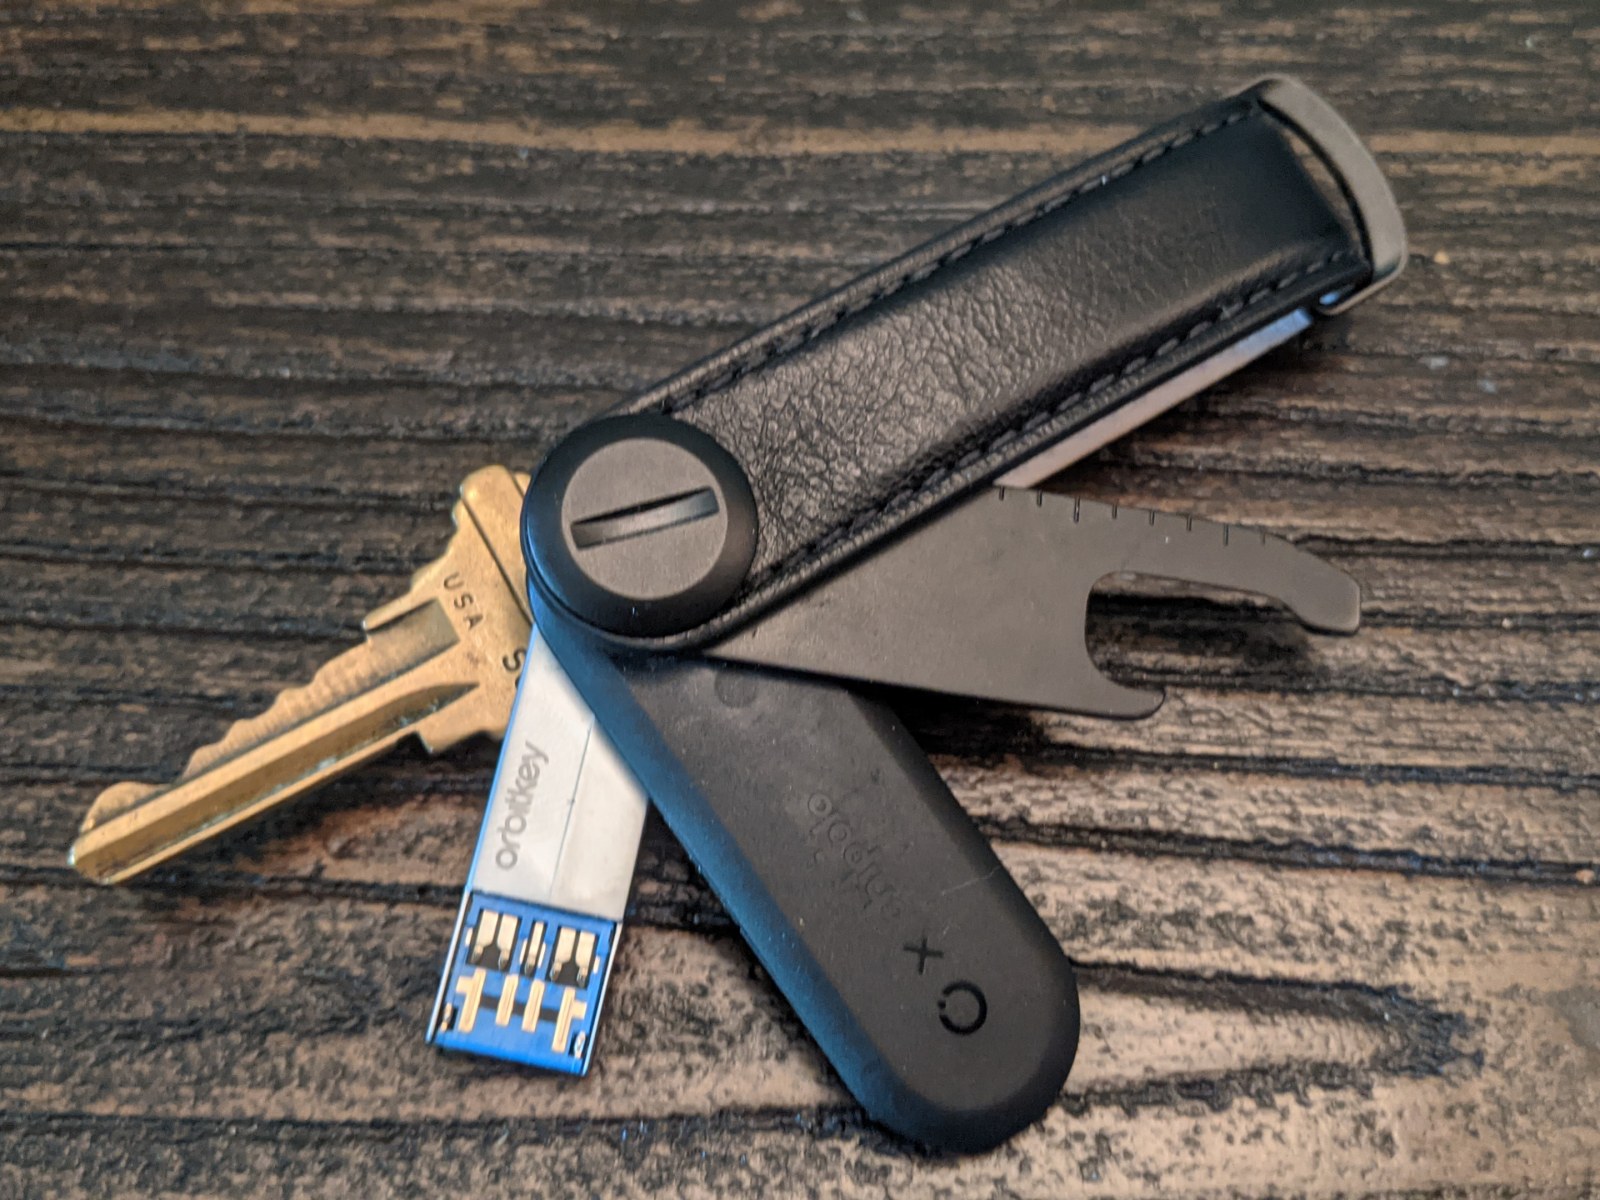 Orbitkey Review: Clever Carry Combines Tech Tools